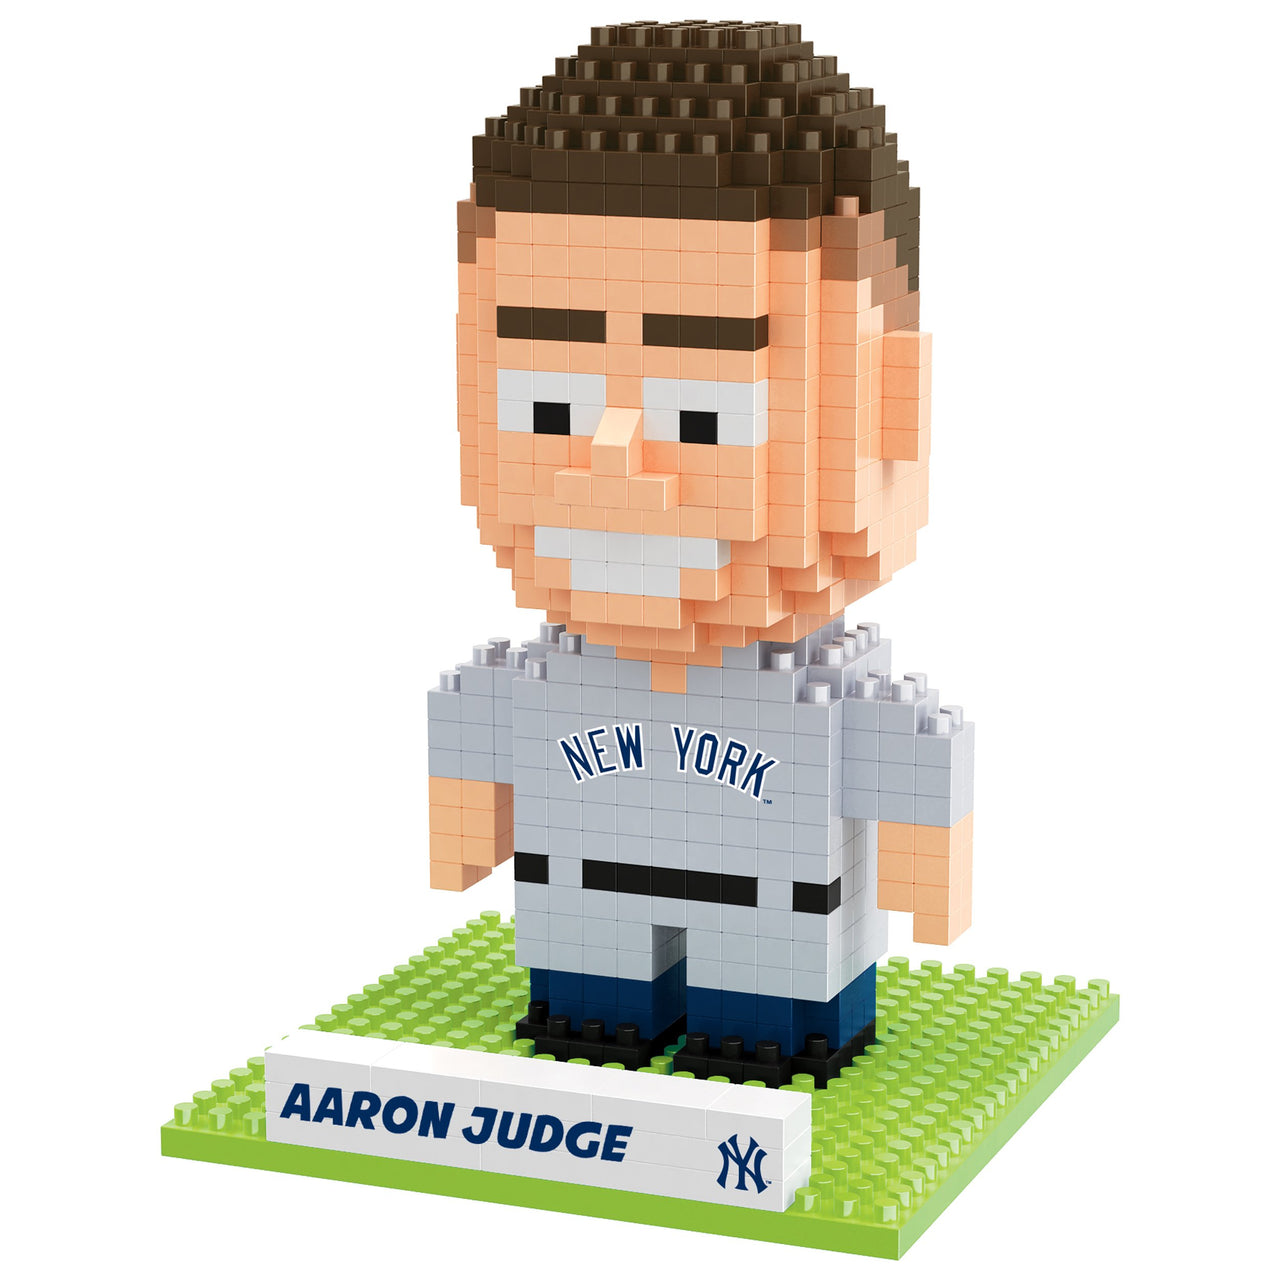 Aaron Judge New York Yankees 3D Player BRXLZ Puzzle - Dynasty Sports & Framing 